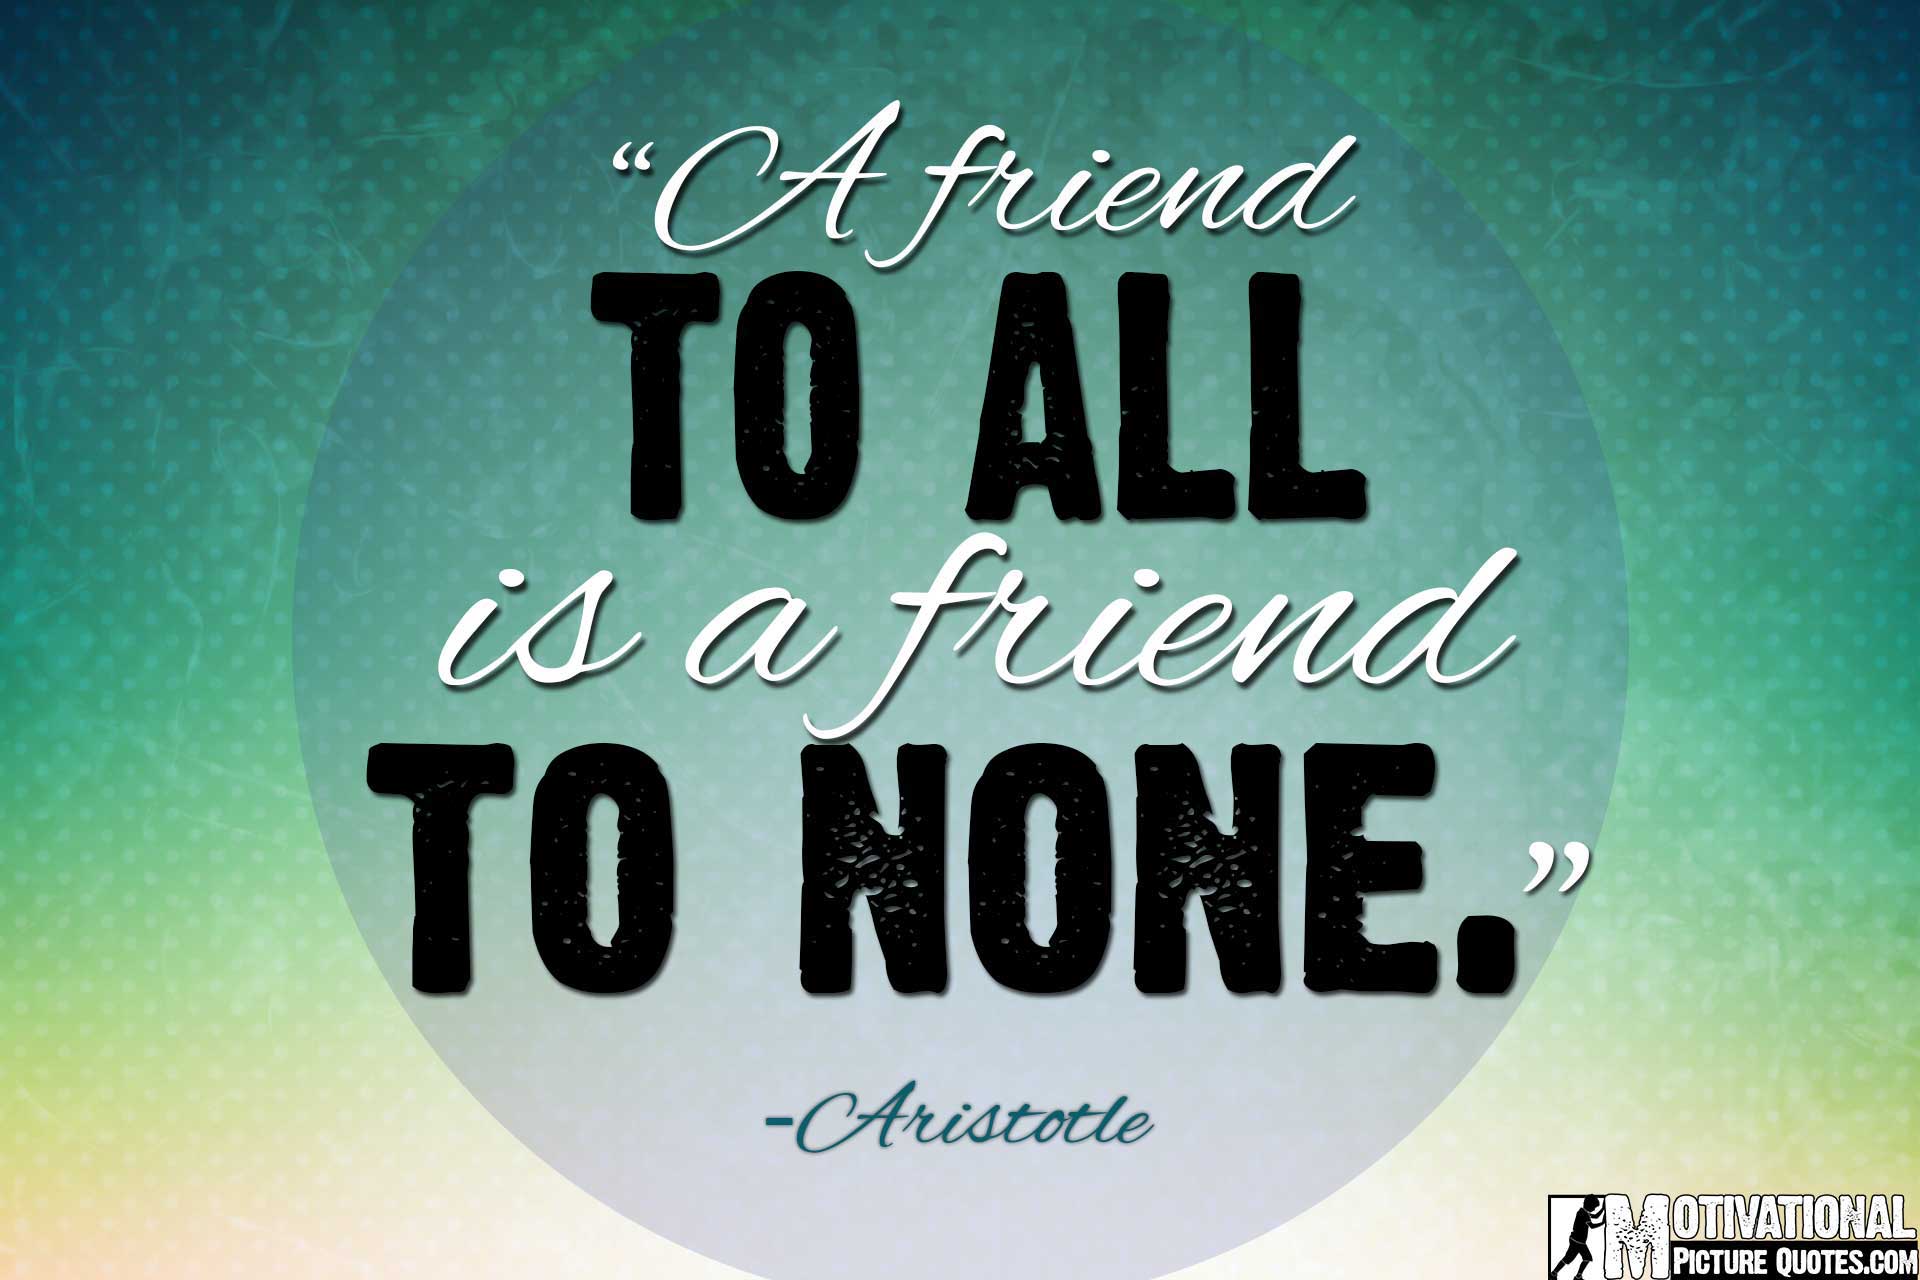 Inspirational Friendship Quotes Image. Free Download